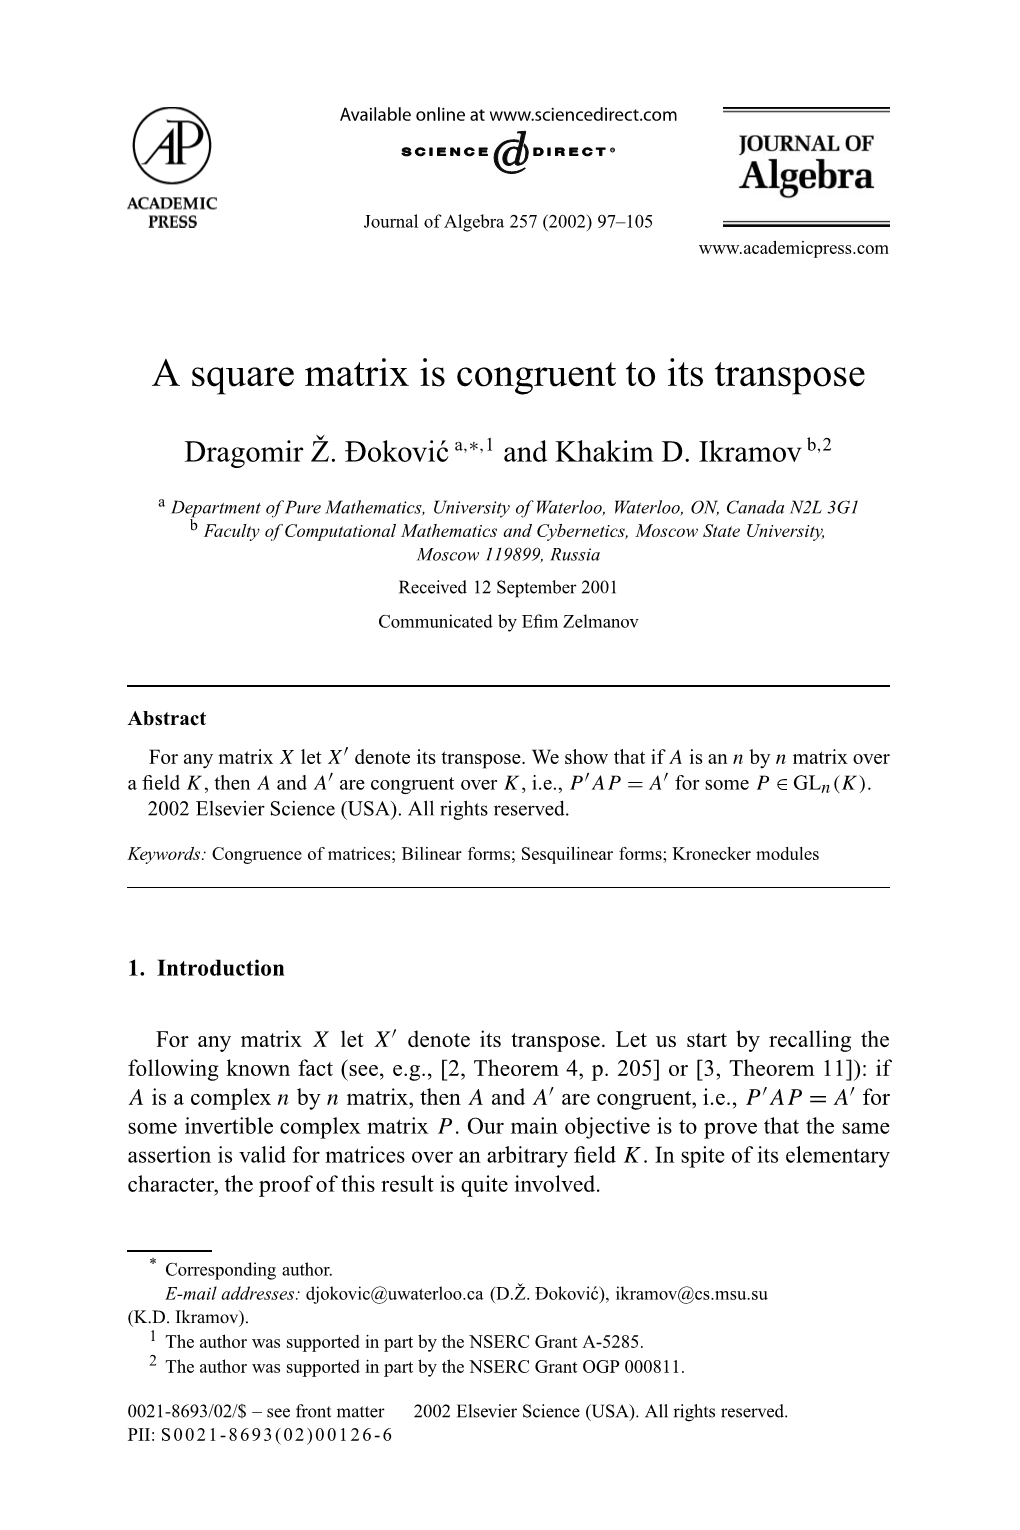 A Square Matrix Is Congruent to Its Transpose